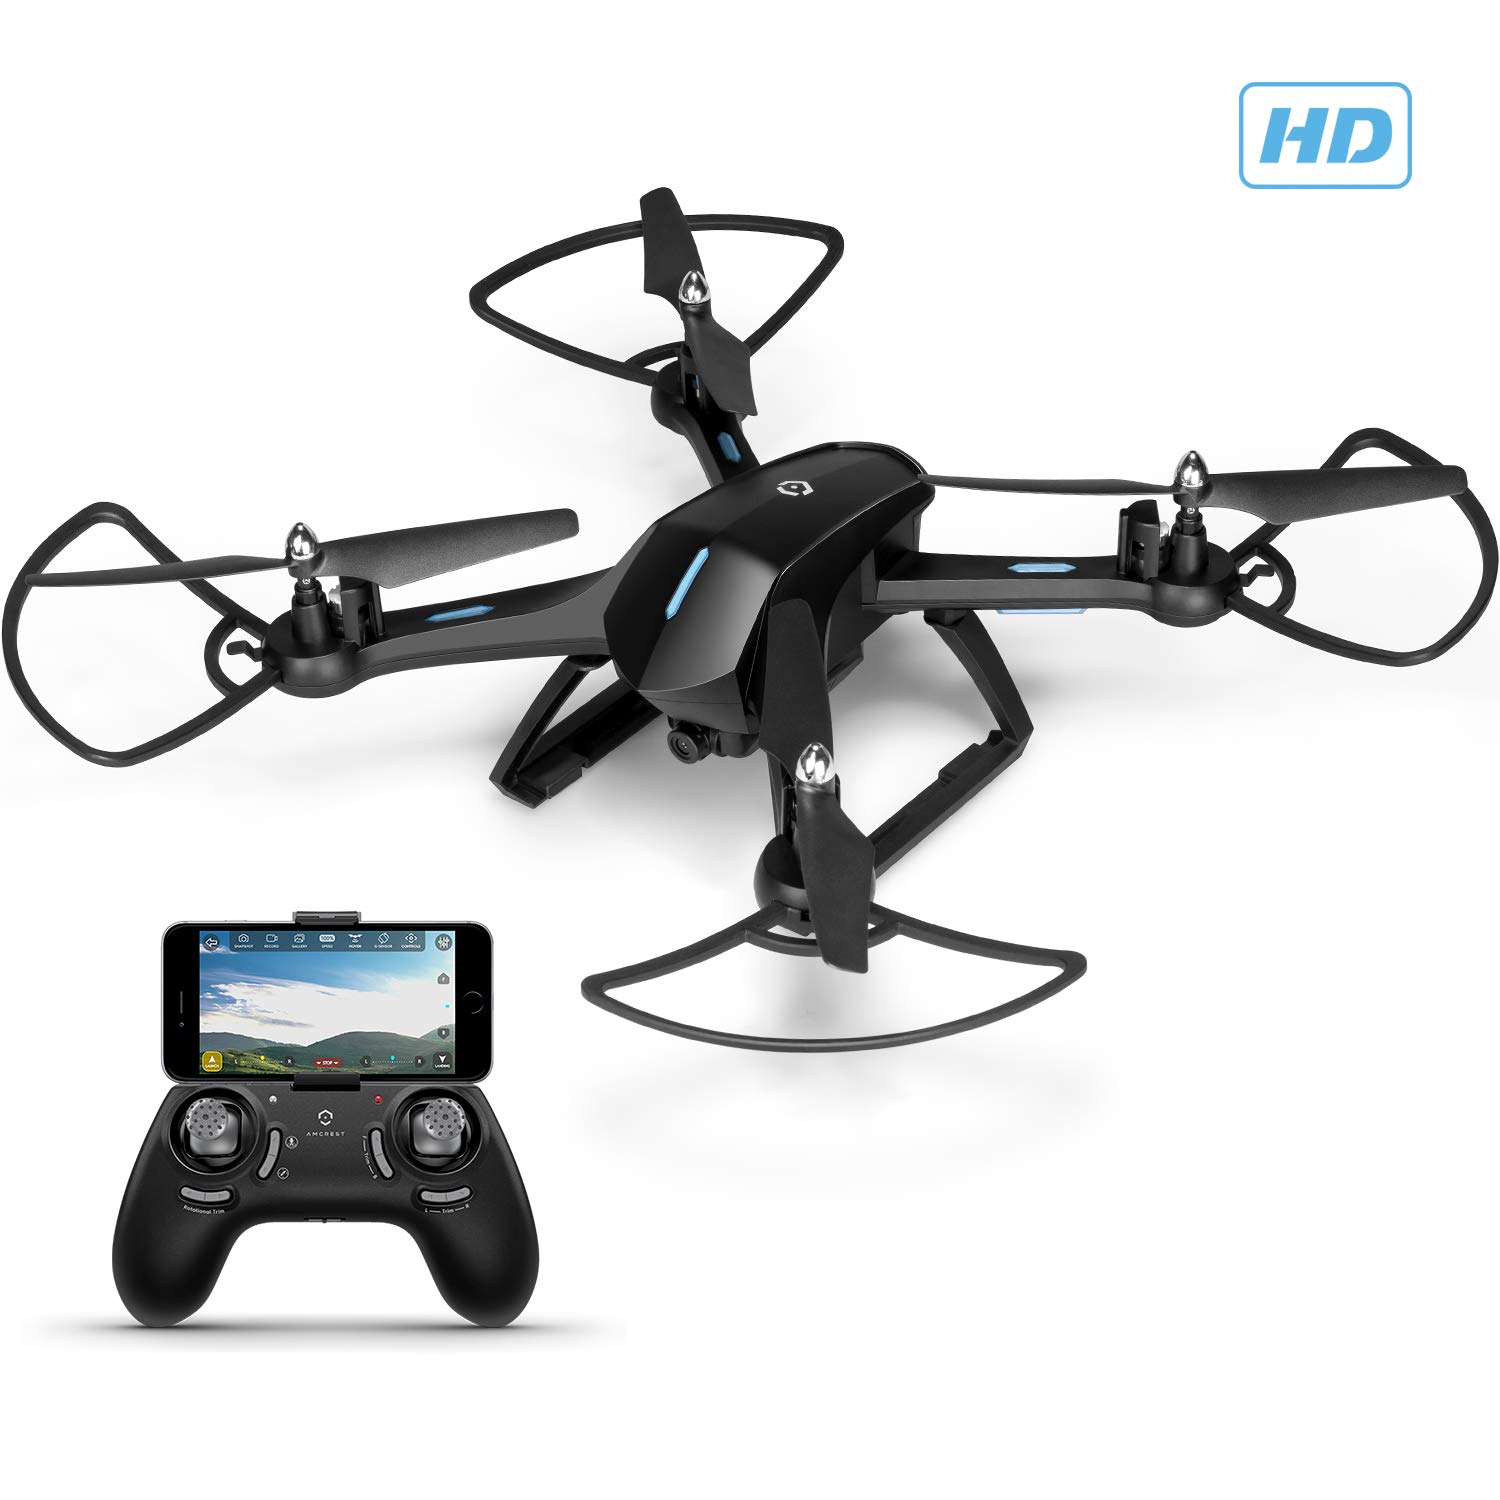 Amcrest A6-B Skyview Pro WiFi Drone with Camera HD 1.3MP FPV Quadcopter, RC + 2.4ghz WiFi Helicopter w/Remote Control, Headless Mode, Smartphone (Black) - image 1 of 6